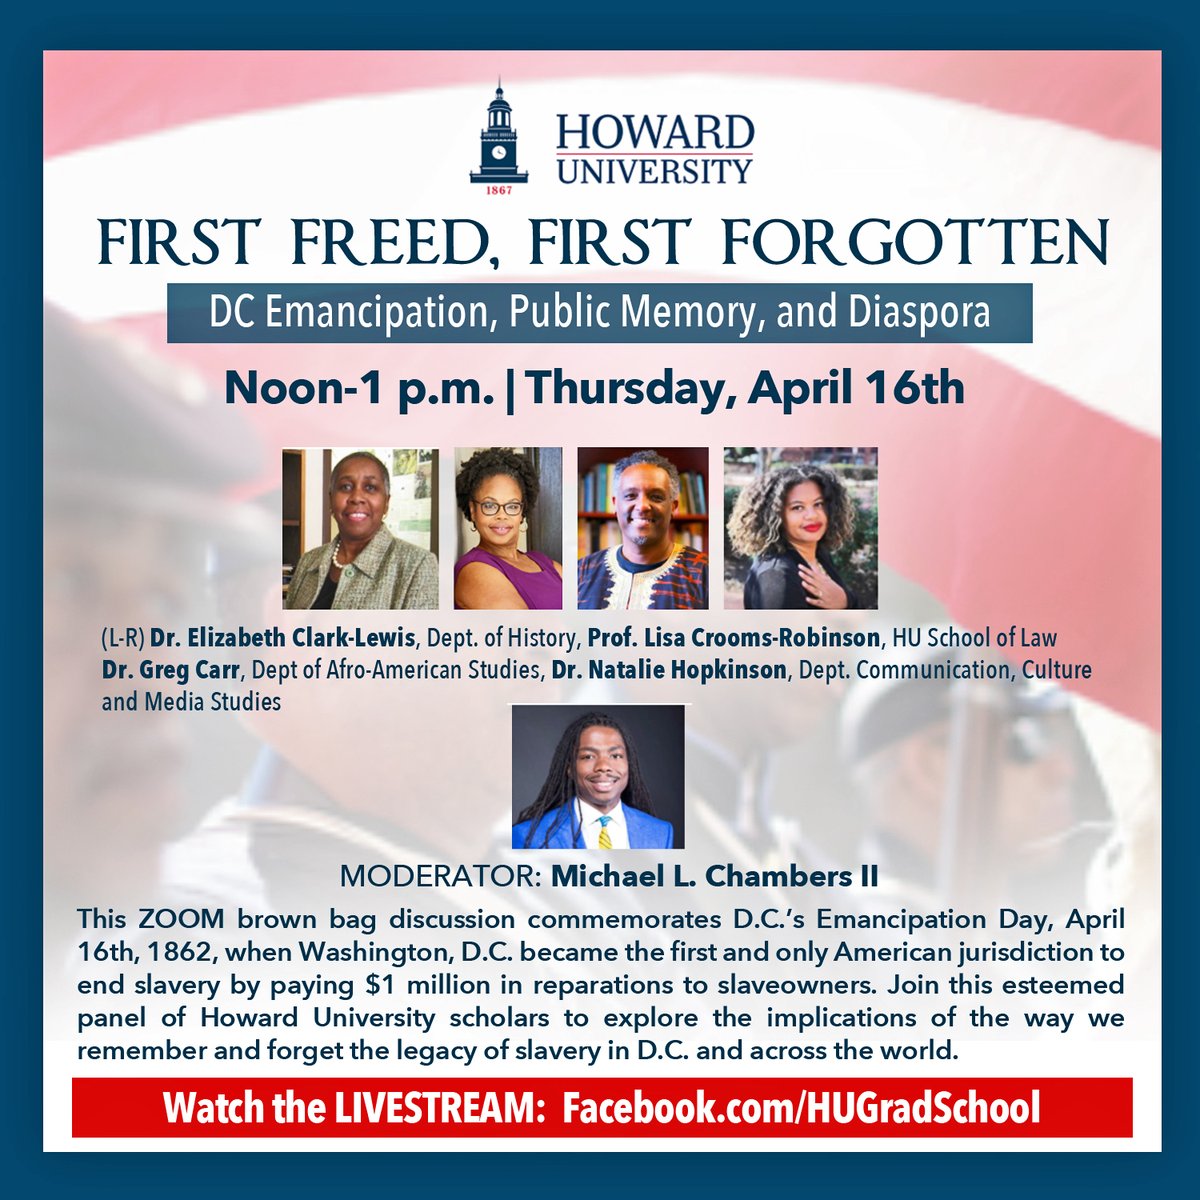 Hosting this 🔥 conversation on #DCEmancipationDay and Emancipation History with some of @HowardU's finest: @AfricanaCarr @NatHopkinson @2xncultjam  and the Dr. Elizabeth Clark-Lewis.
#DC #BlackHistory #Emancipation #PublicHistory #LegacyOfSlavery #AmericanHistory #HU #UKnow